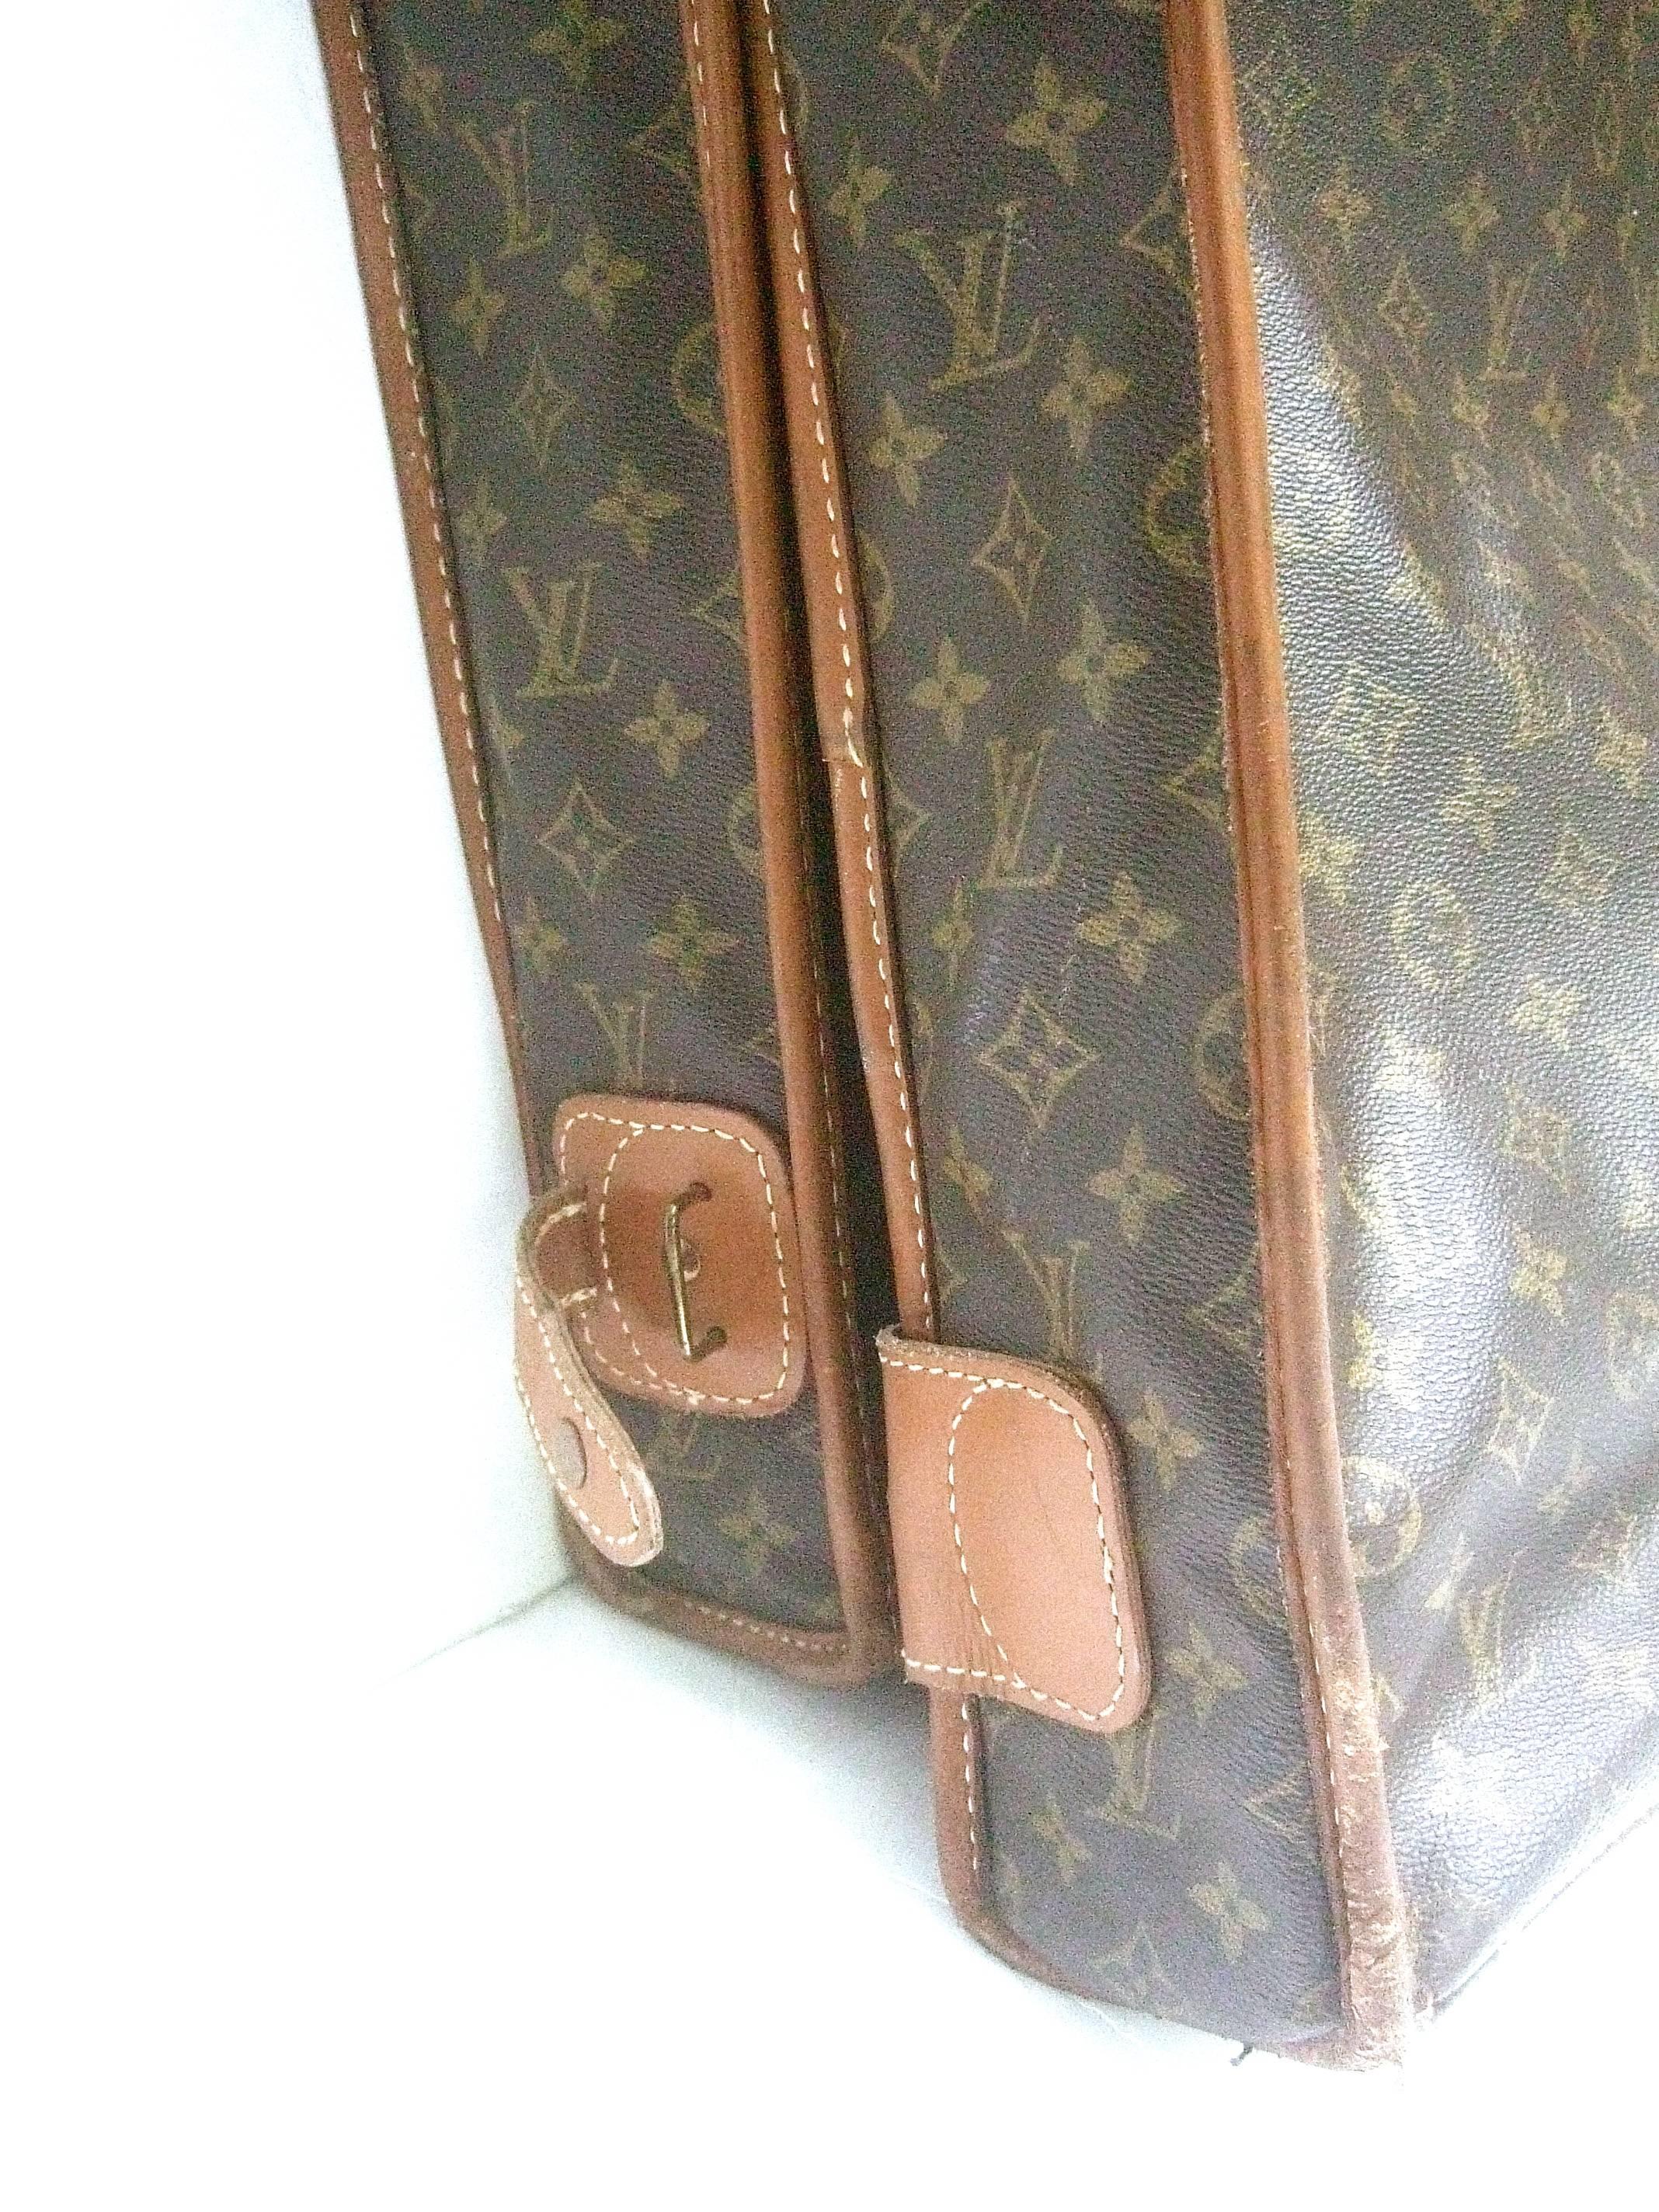 Louis Vuitton Shabby Chic Well Loved Garment Travel Case c 1970s 3